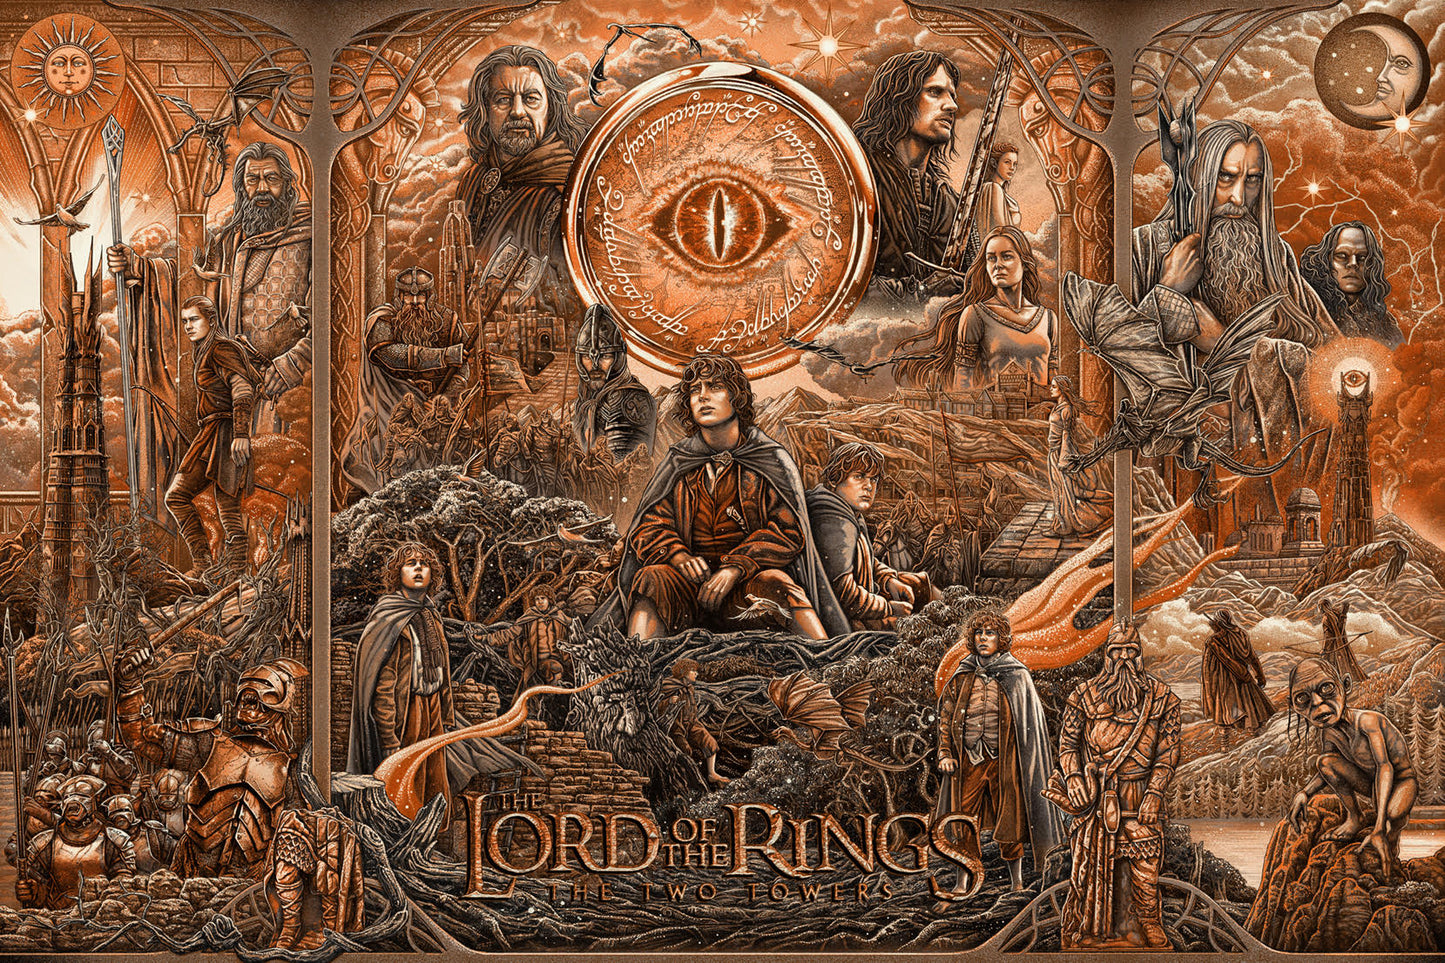 Ise Ananphada "The Lord of the Rings: The Two Towers" Variant